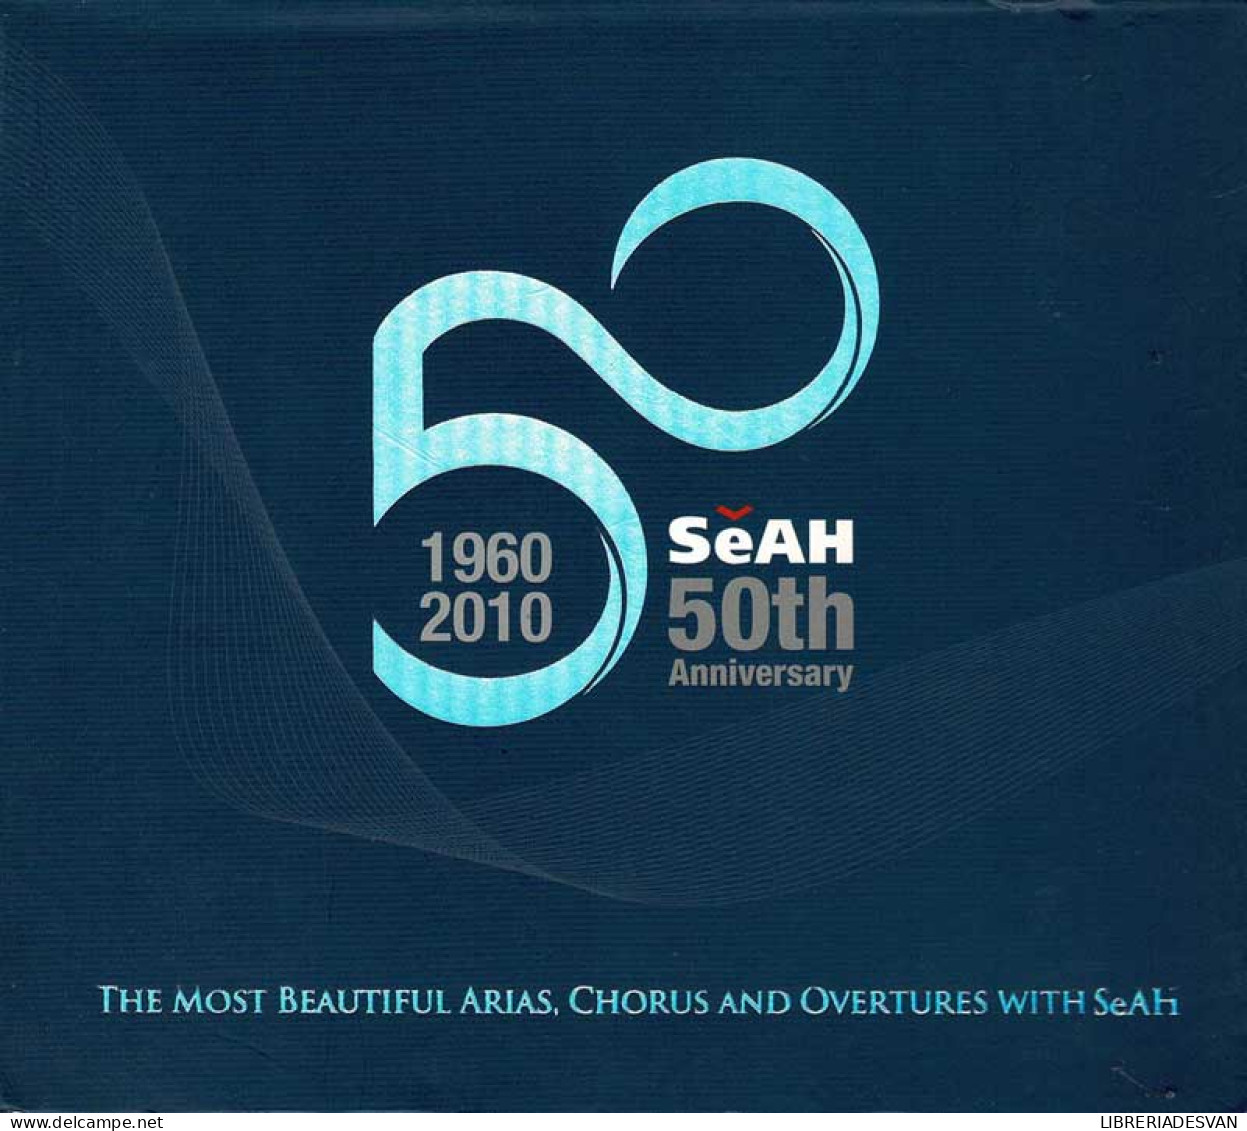 The Most Beautiful Arias. Chorus And Overtures With SeAh 50th Anniversary. 2 X CD - Classica